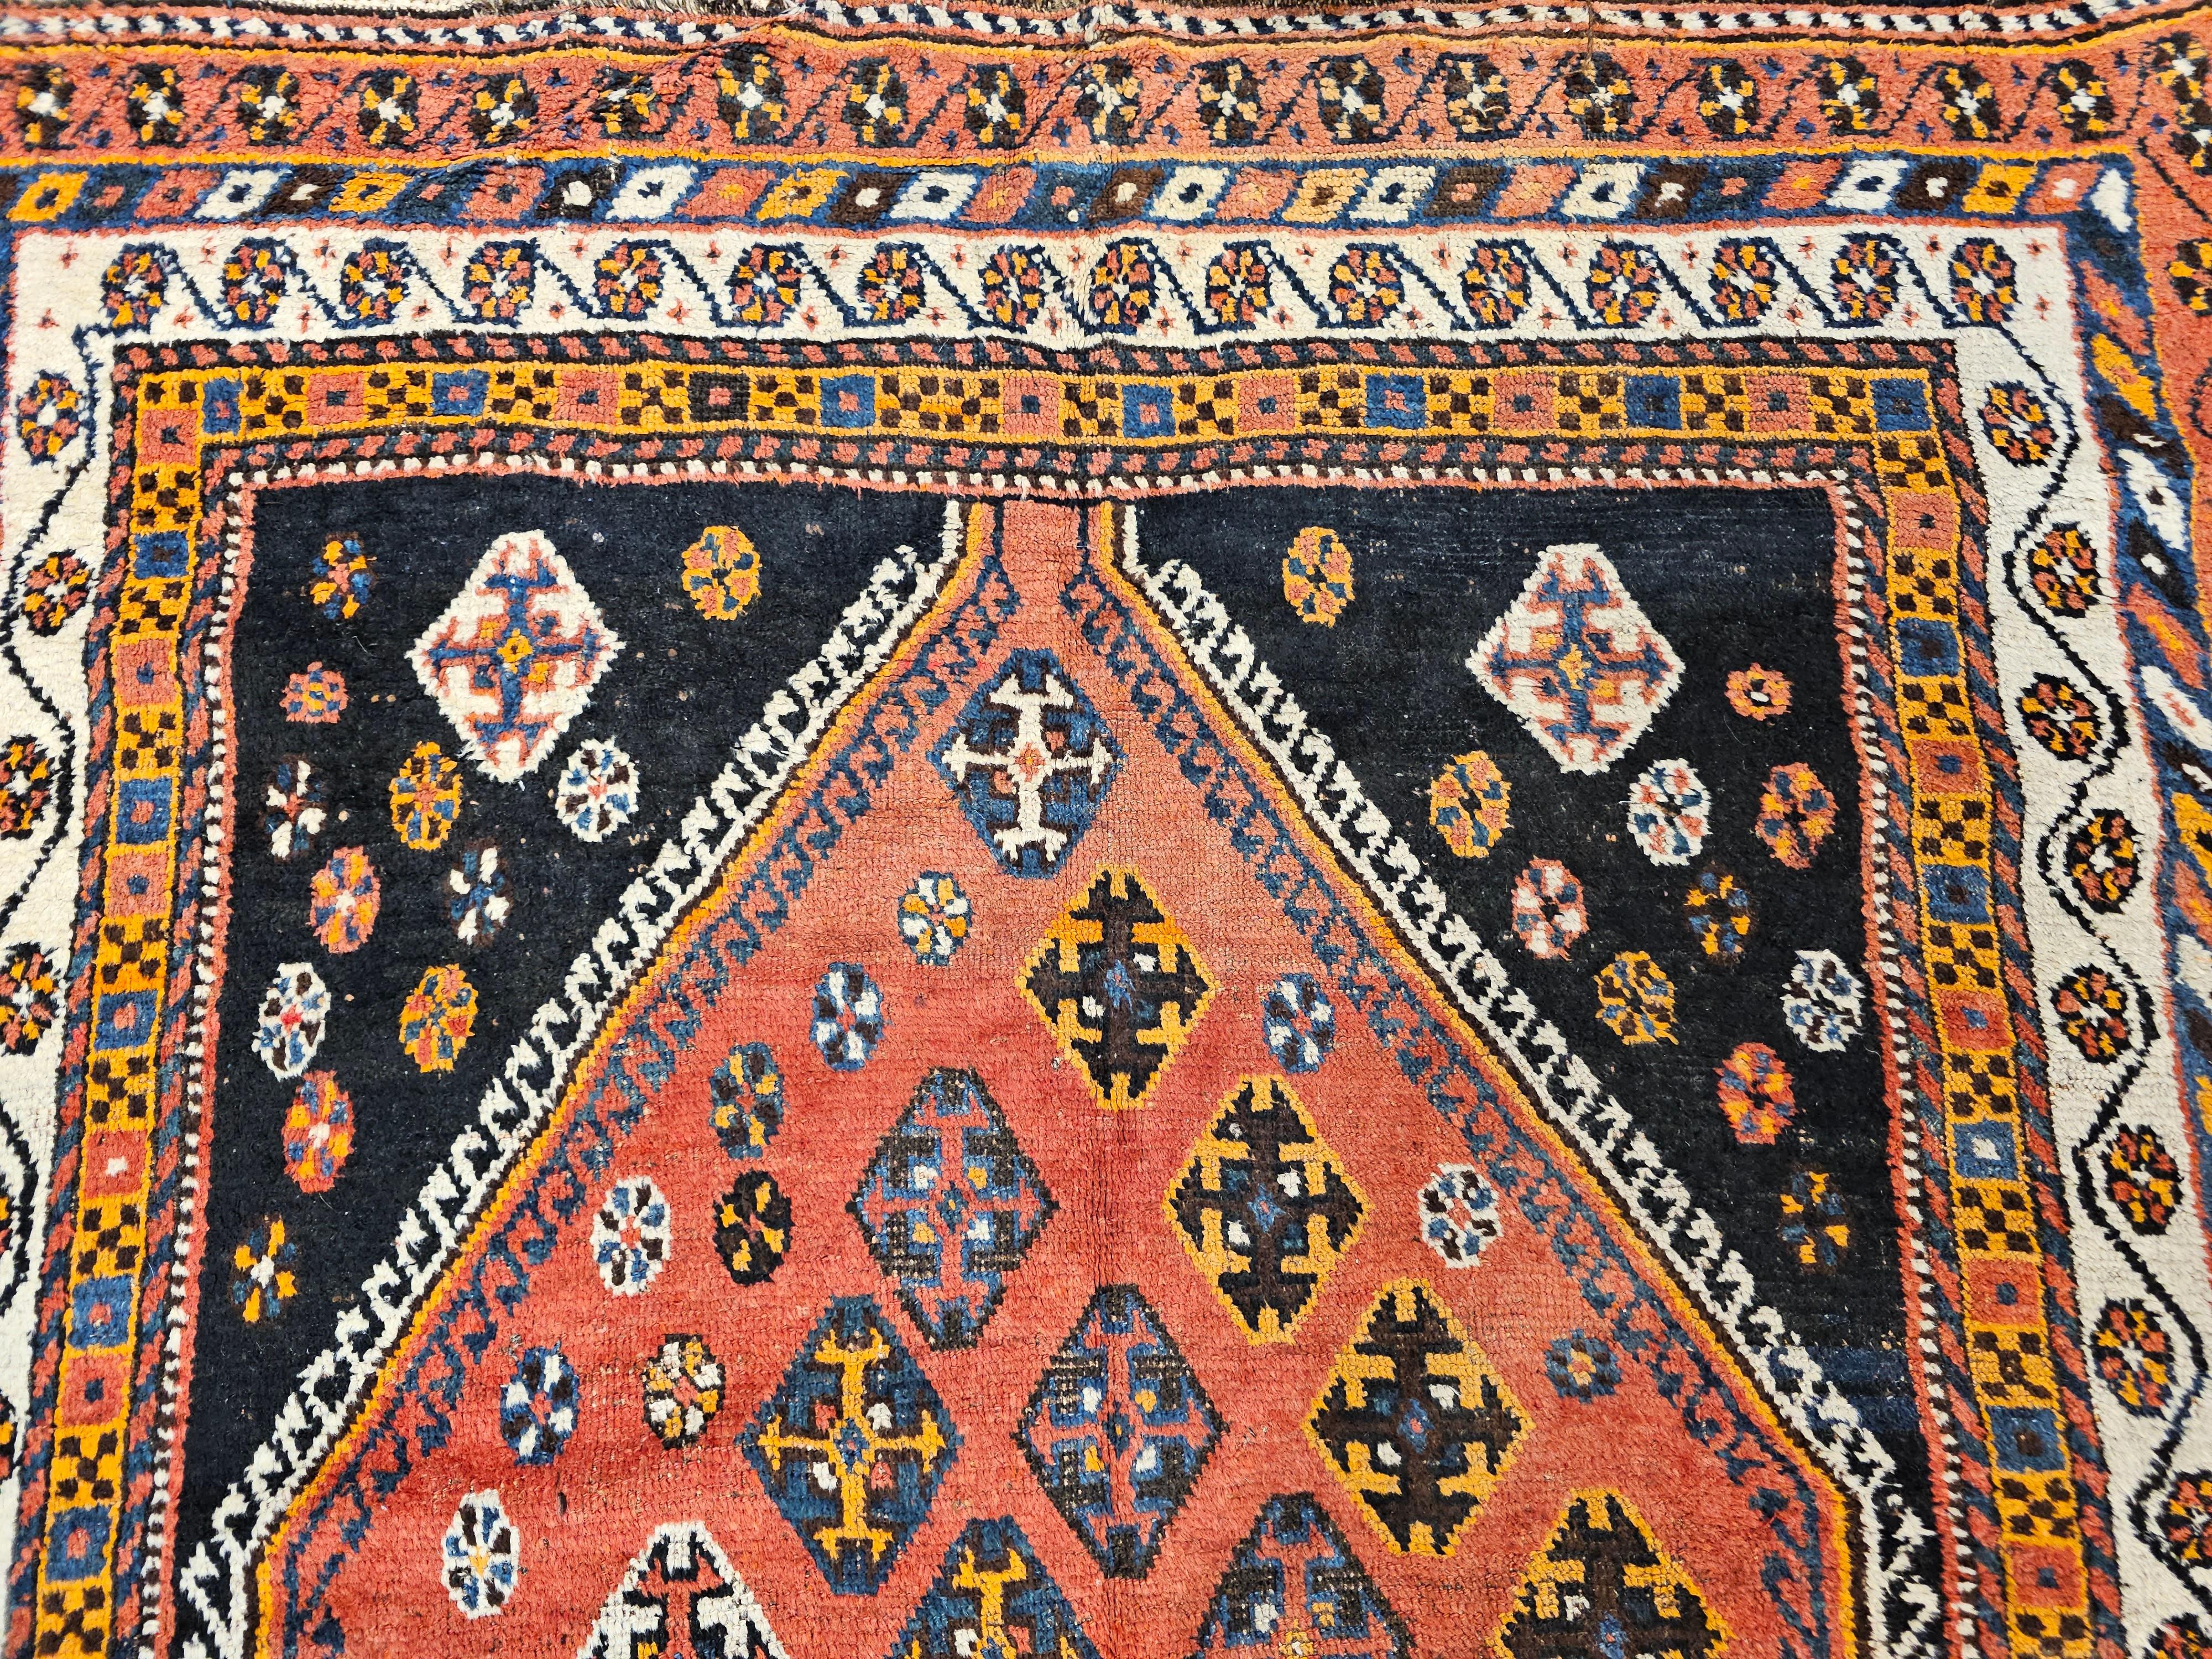 Vintage Persian Qashqai Tribal Area Rug in Rust, Ivory, Blue, Yellow, Black For Sale 4